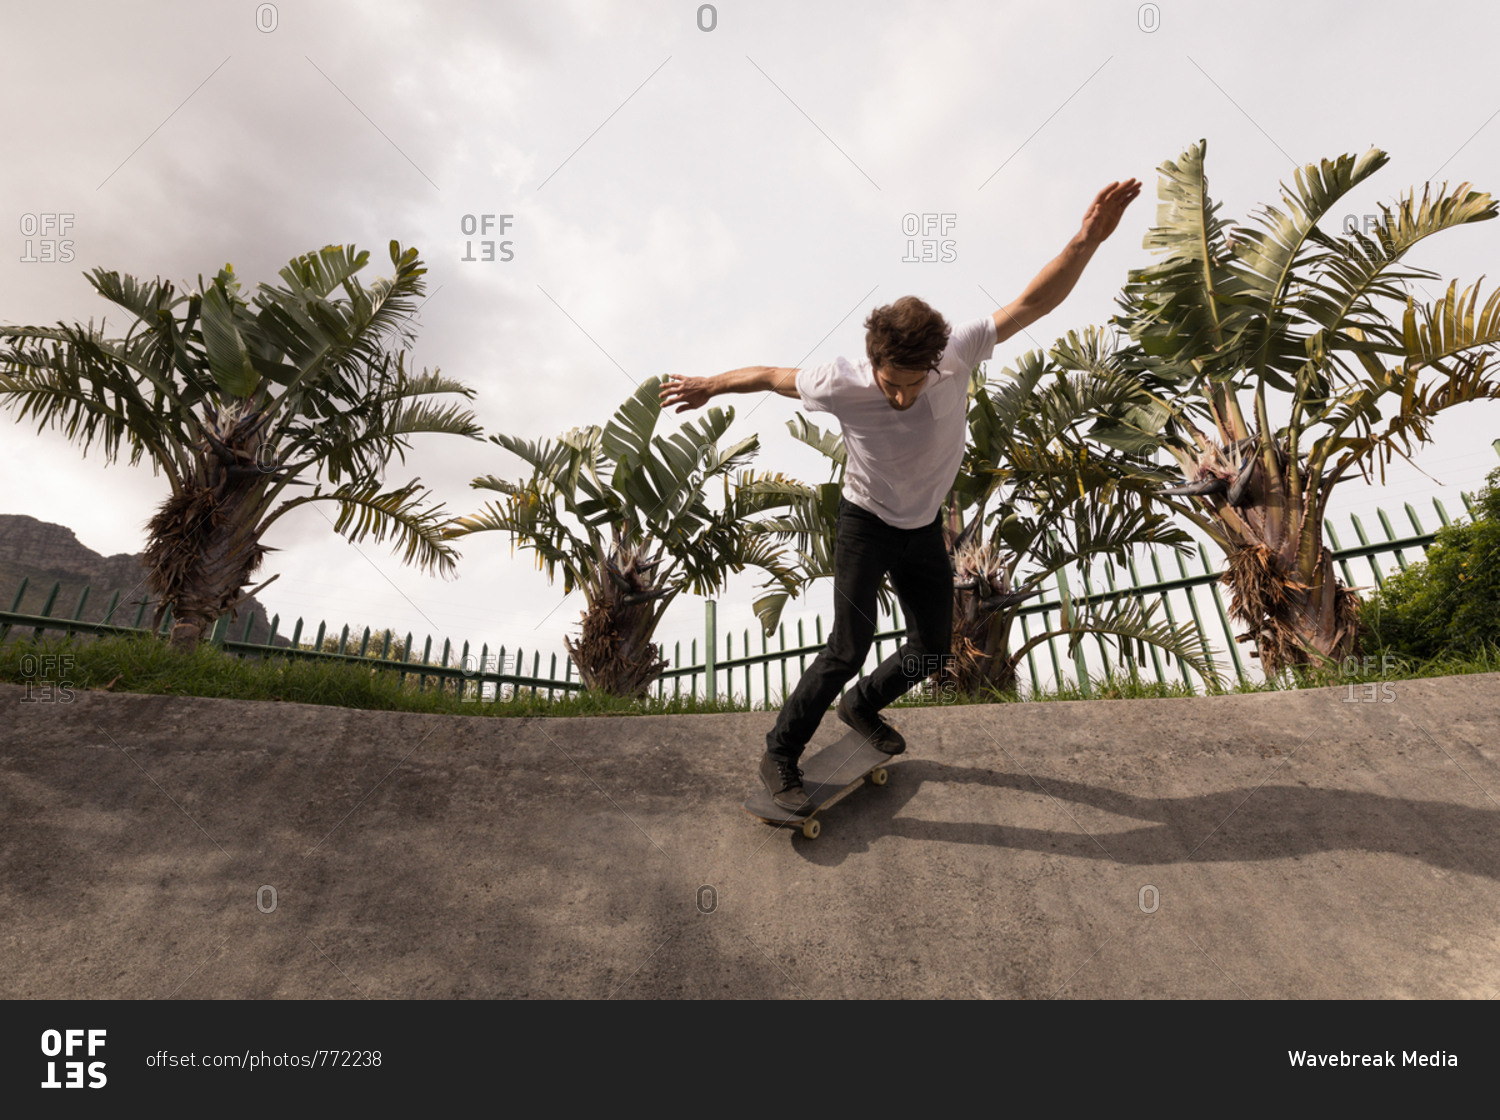 Low angle view of man skateboarding in skateboard park